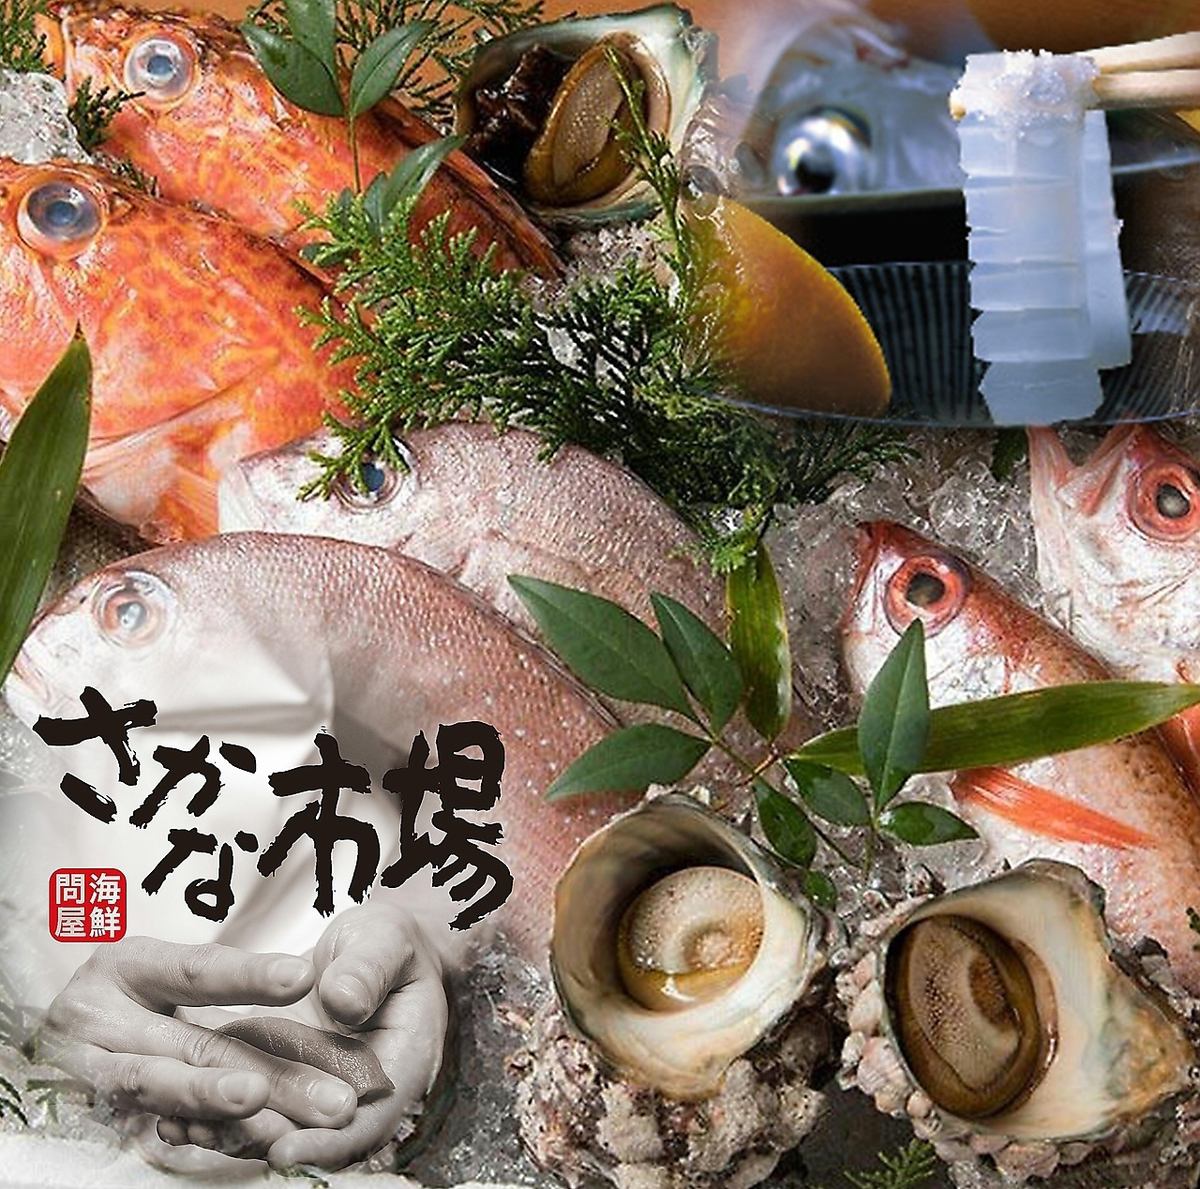 Affordable prices for delicious fish such as the fish market specialty "Ikizukuri of squid"